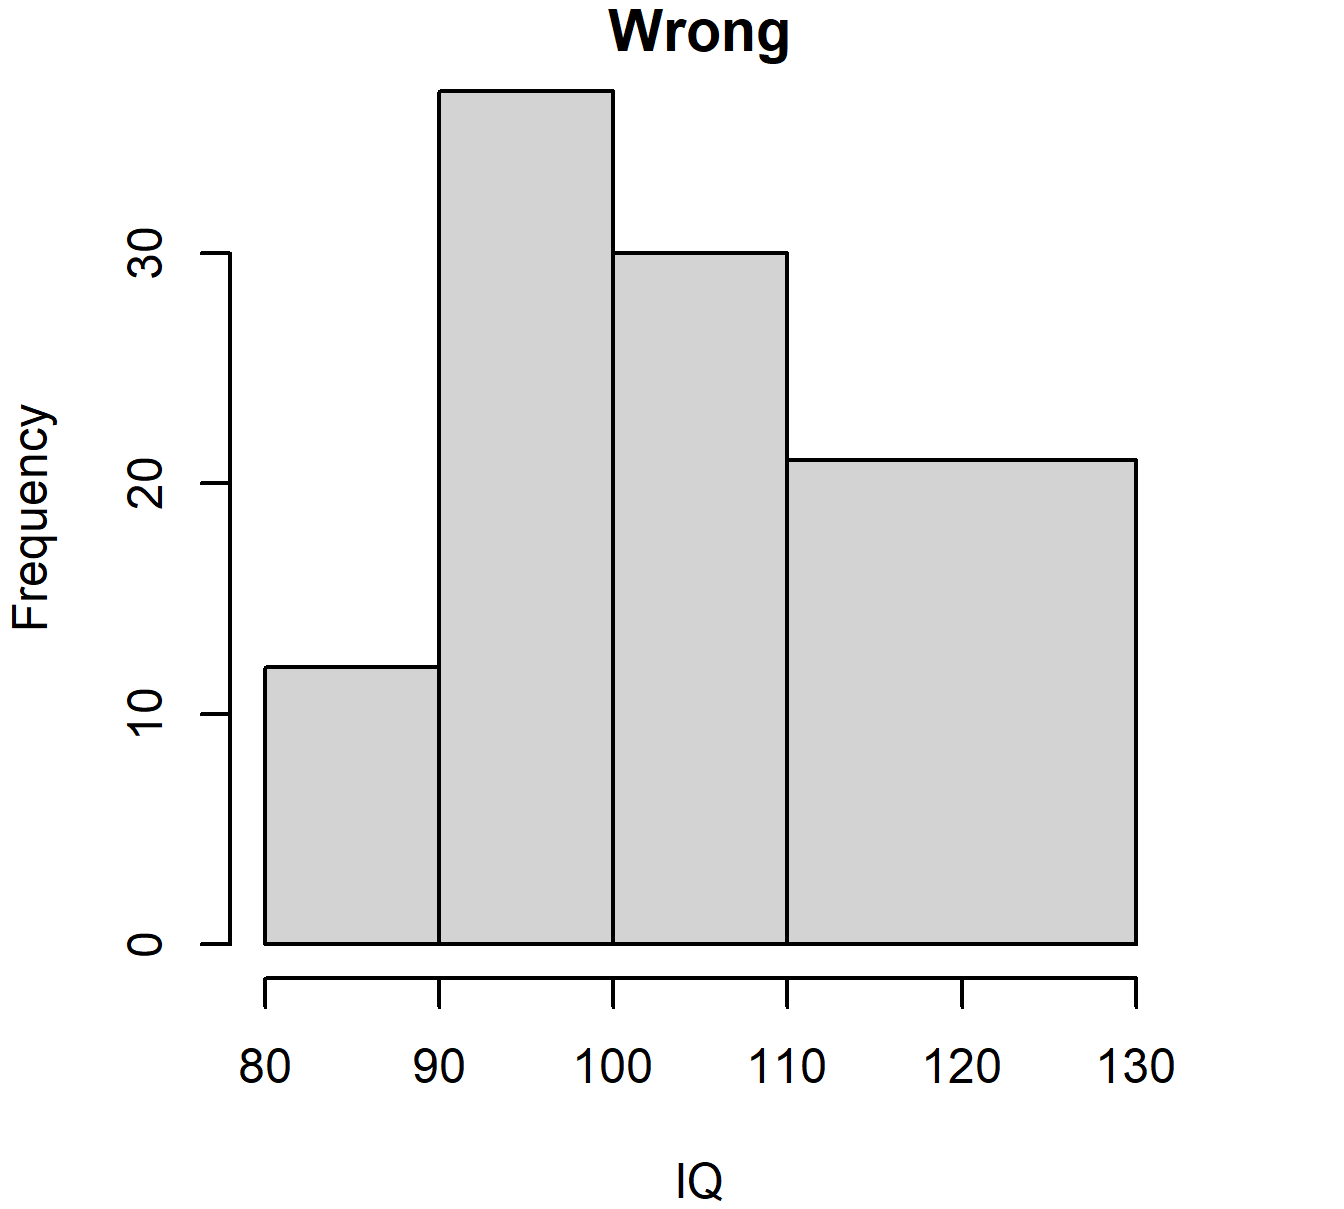 Histogram of IQ data with unequal bar widths: wrong and right versions